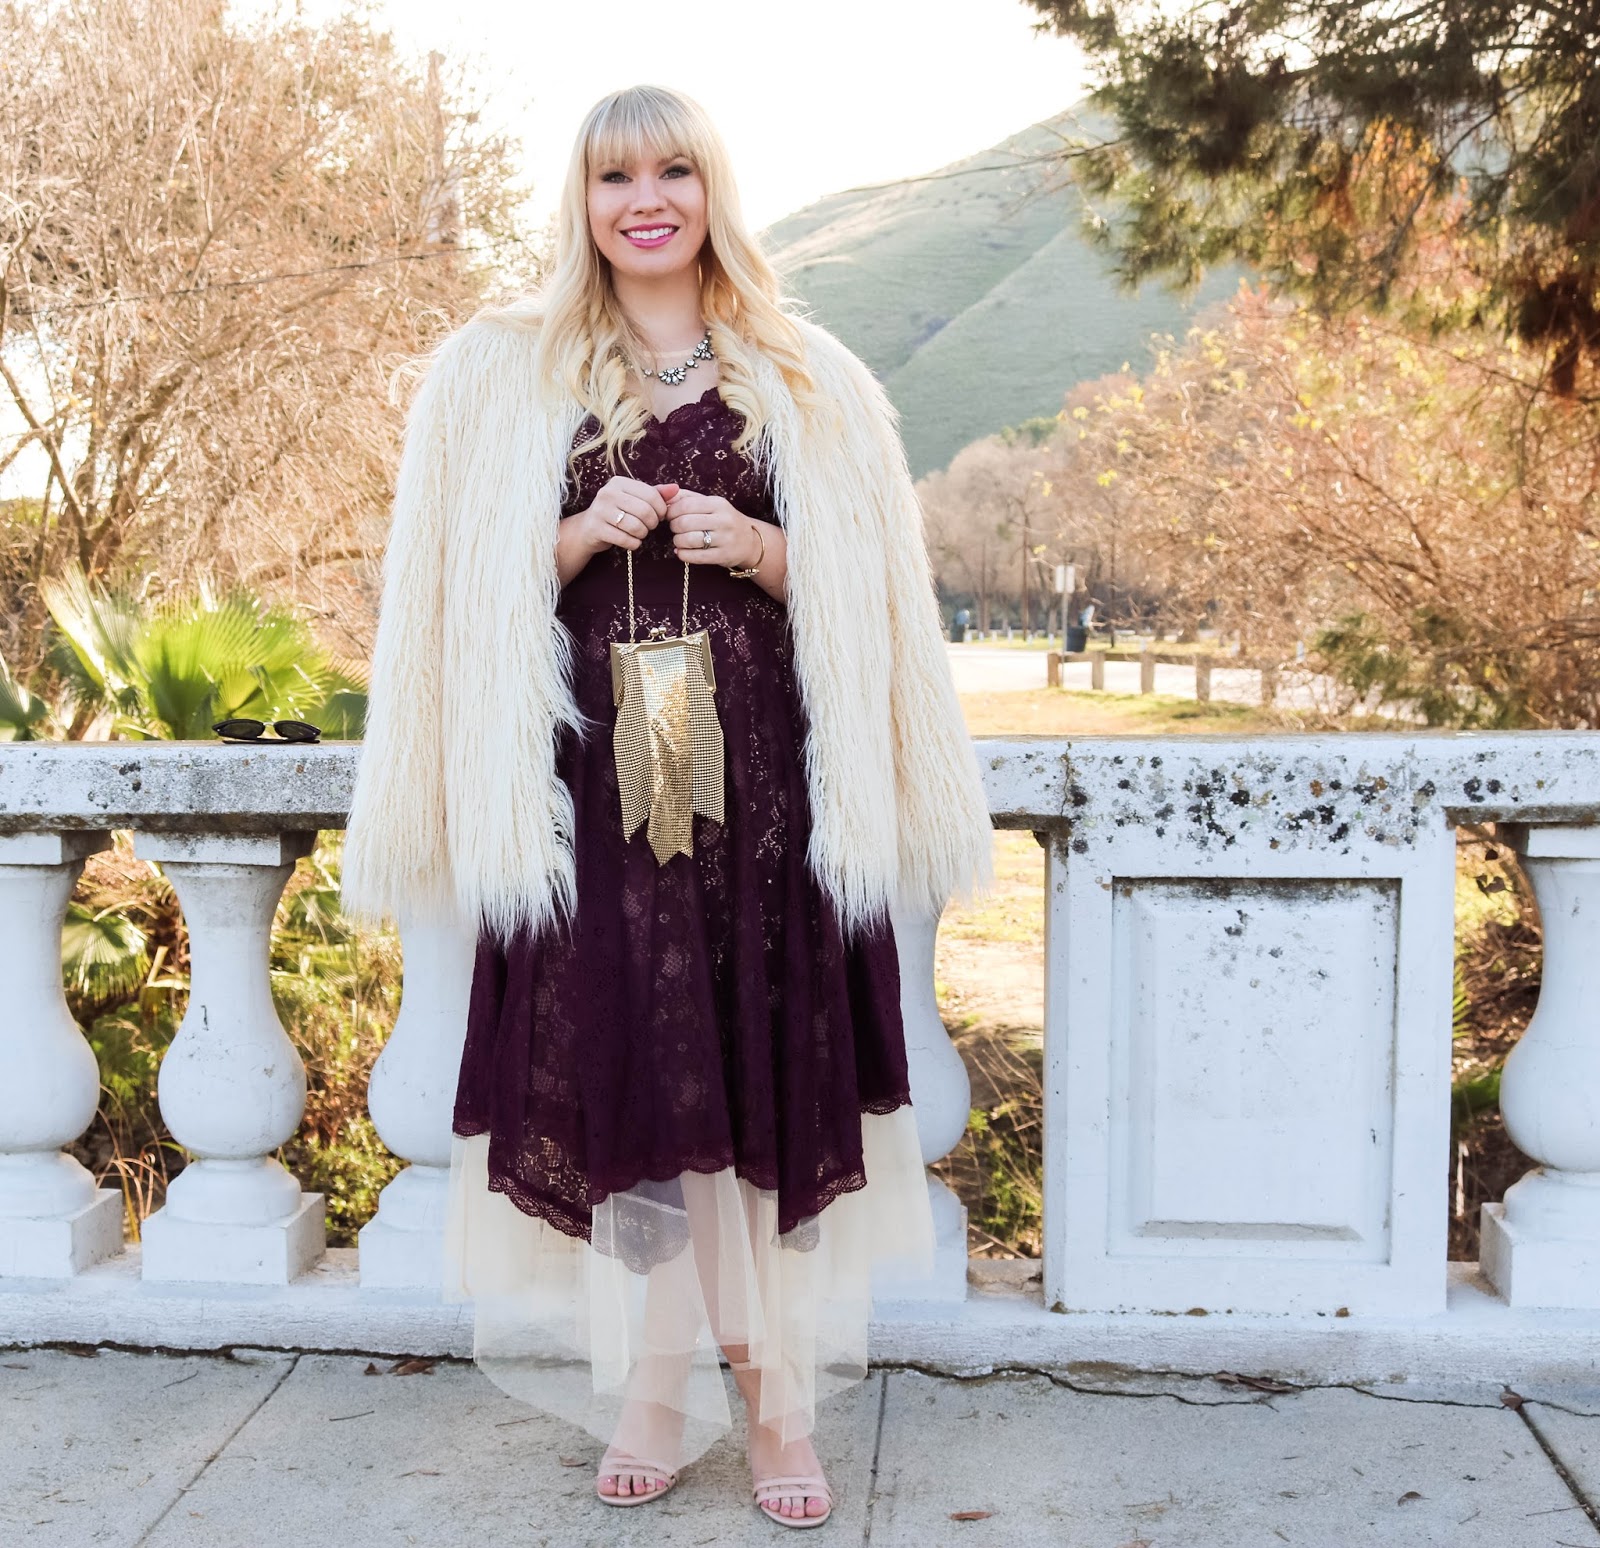 New Year's Eve Outfit: Lace Dress & Faux Fur Coat